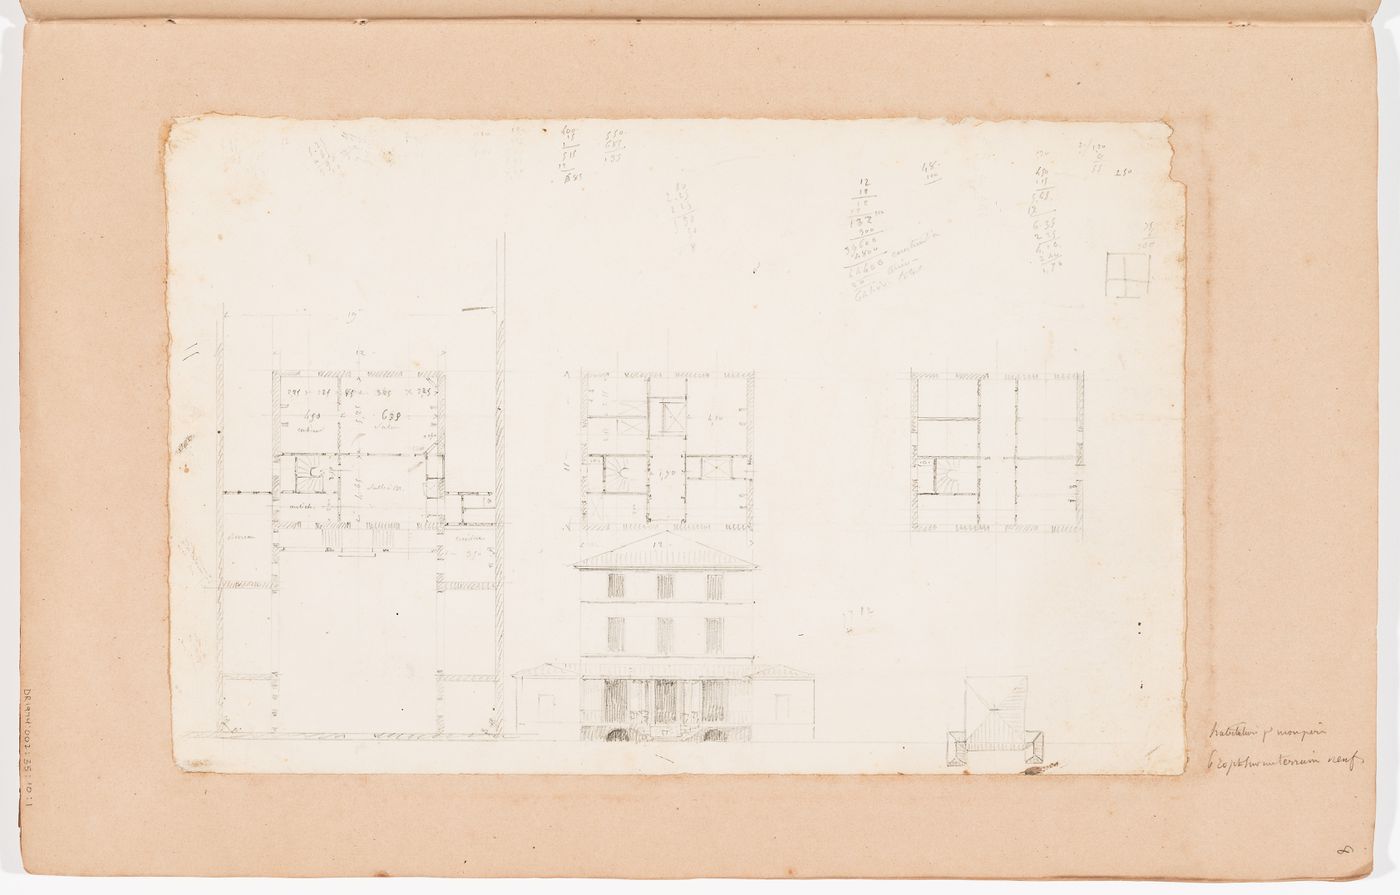 Front elevation and plans for an unidentified house